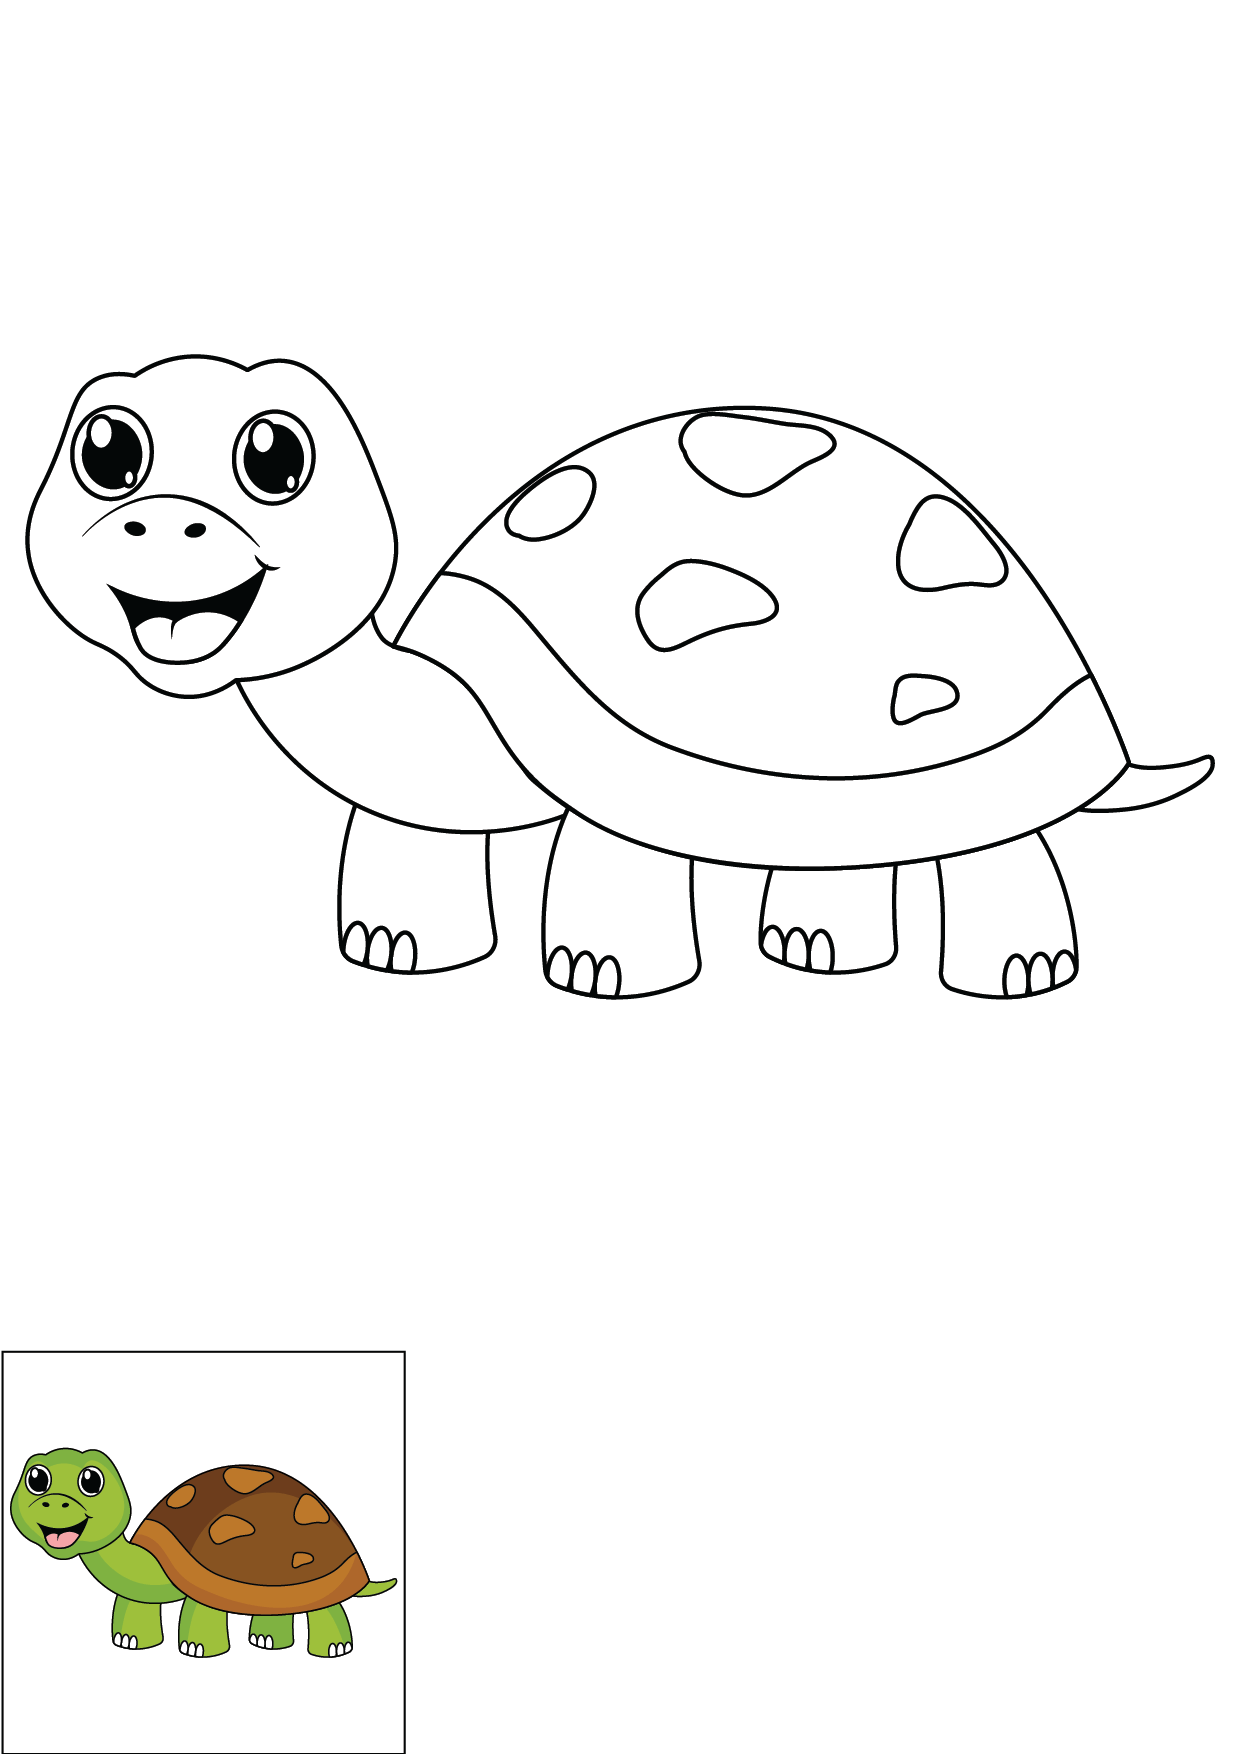 How to Draw A Turtle Step by Step Printable Color